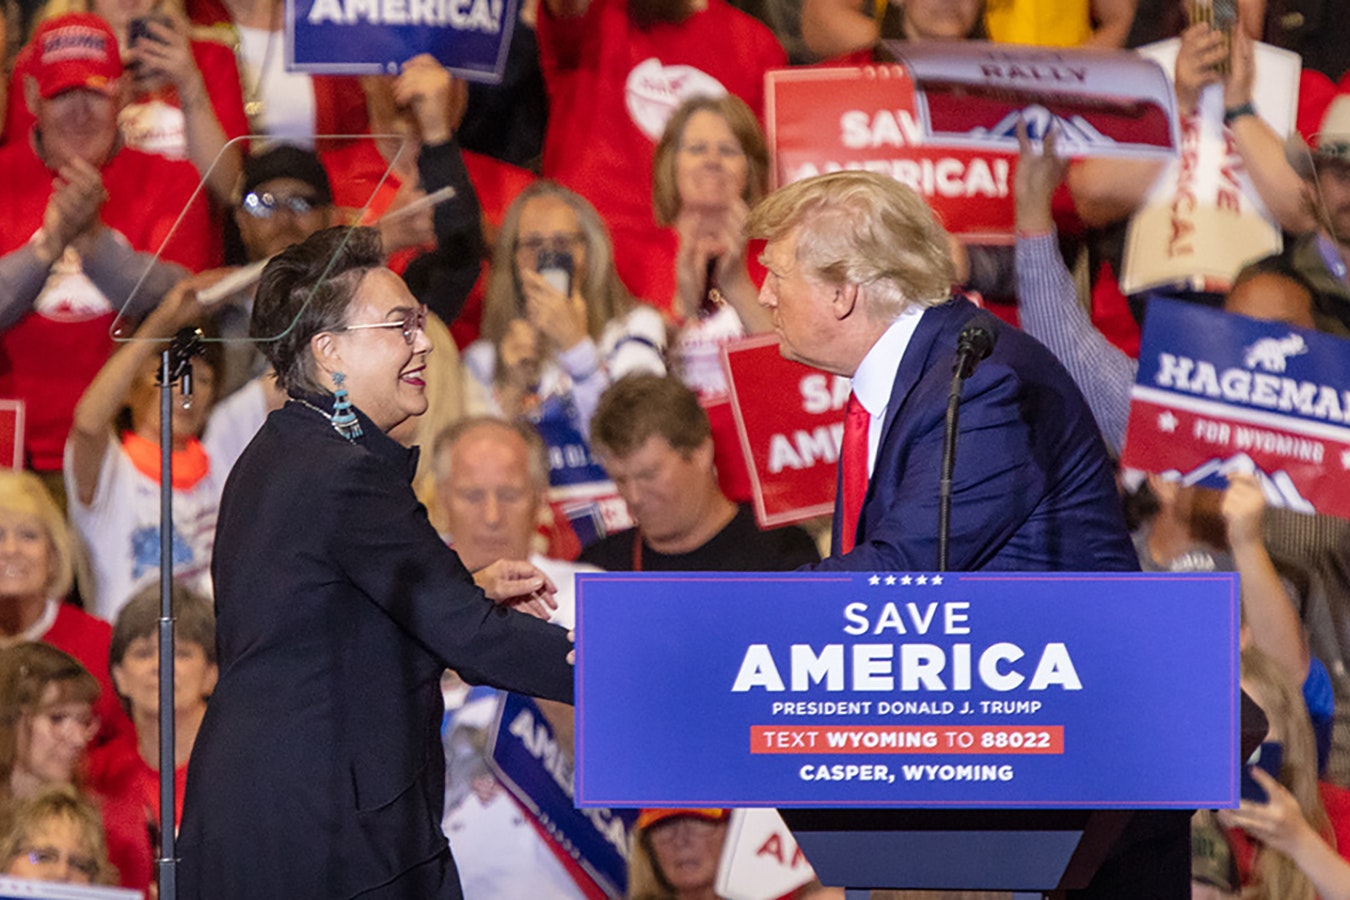 Harriet Hageman and Donald Trump together at a Save America rally in Casper, Wyoming, in May 2022.